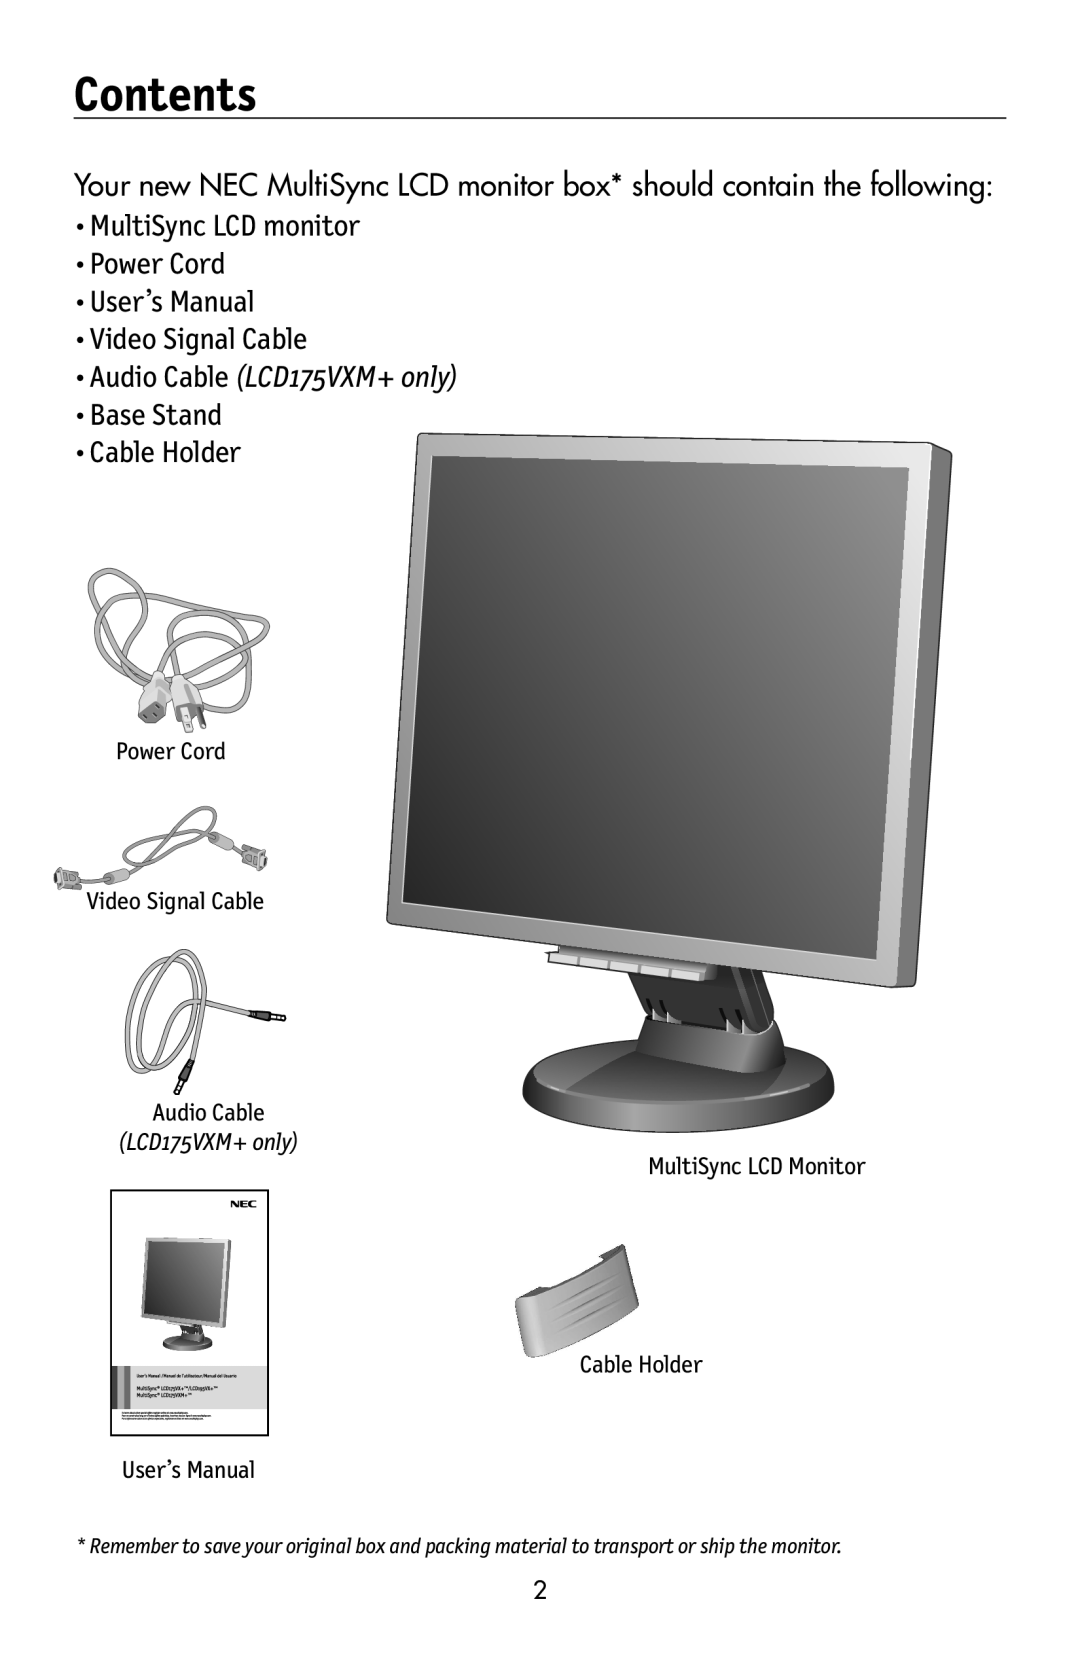 NEC 175VXM Contents, •MultiSync LCD monitor •Power Cord •User’s Manual, •Video Signal Cable, Base Stand Cable Holder 